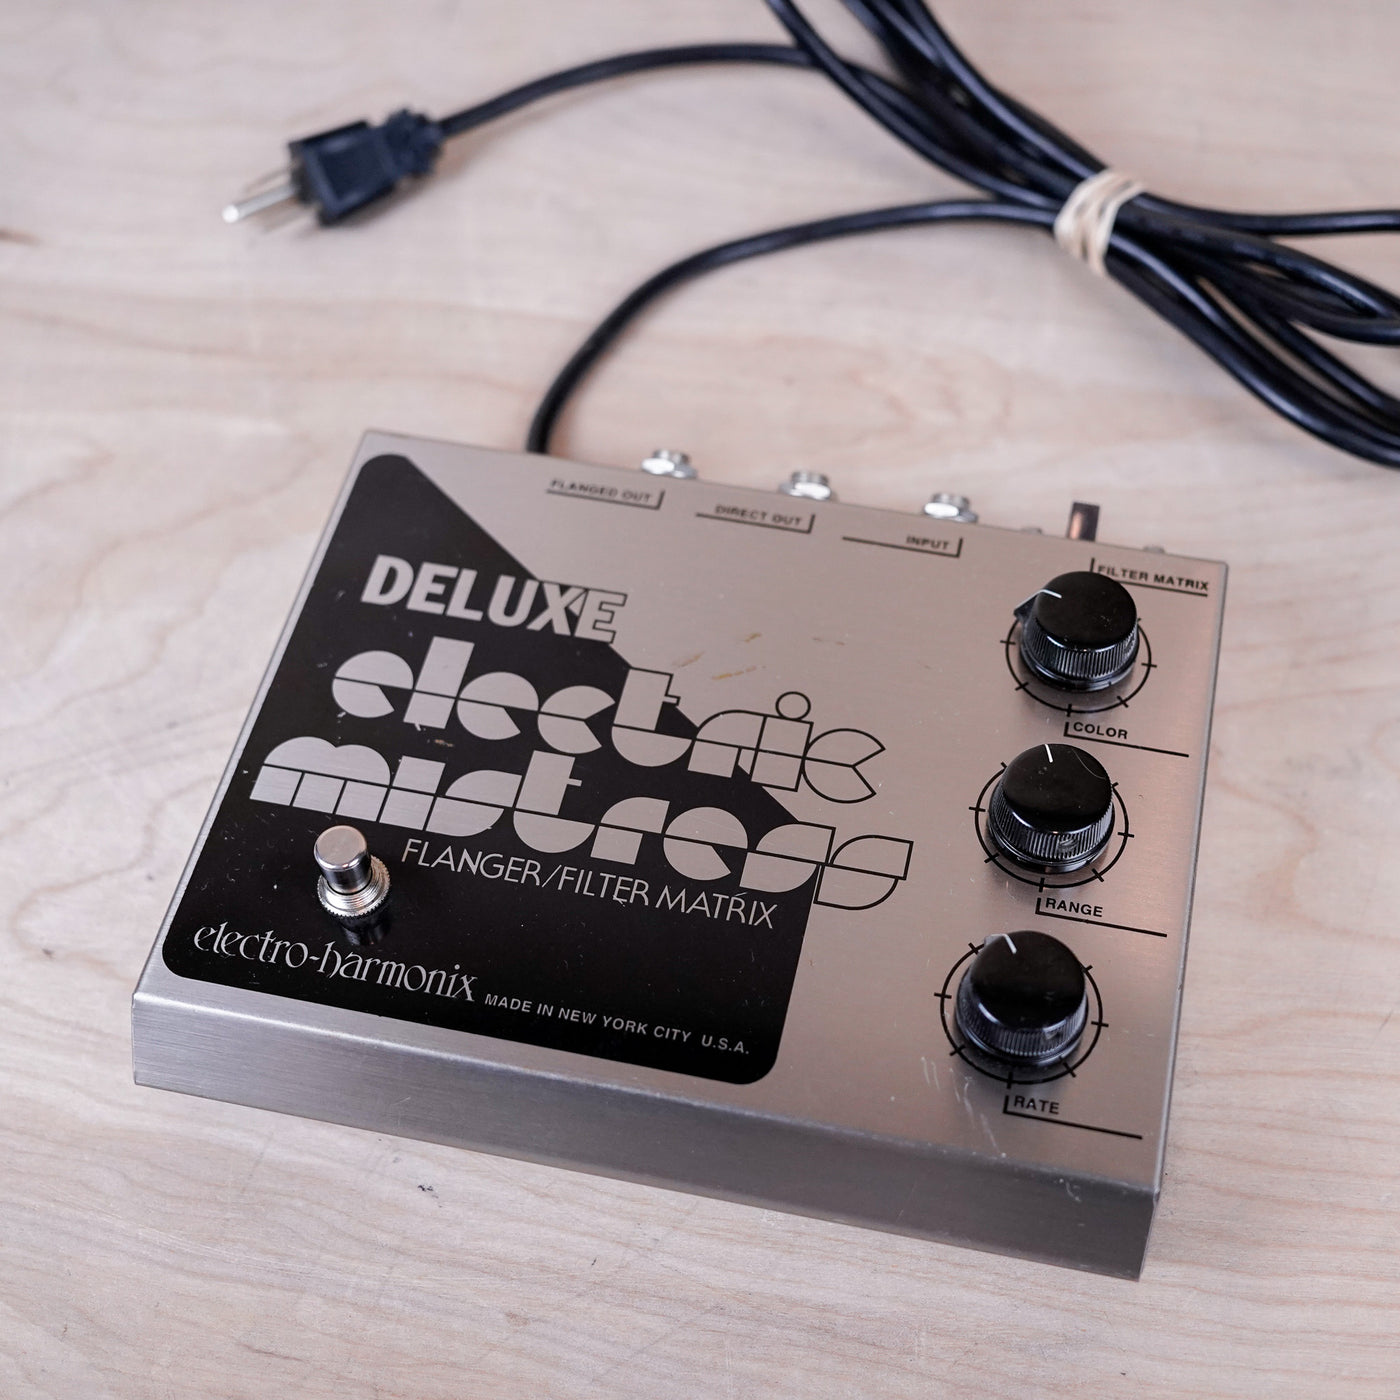 Electro-Harmonix Deluxe Electric Mistress Flanger / Filter Matrix Reissue with Power Cord 1999